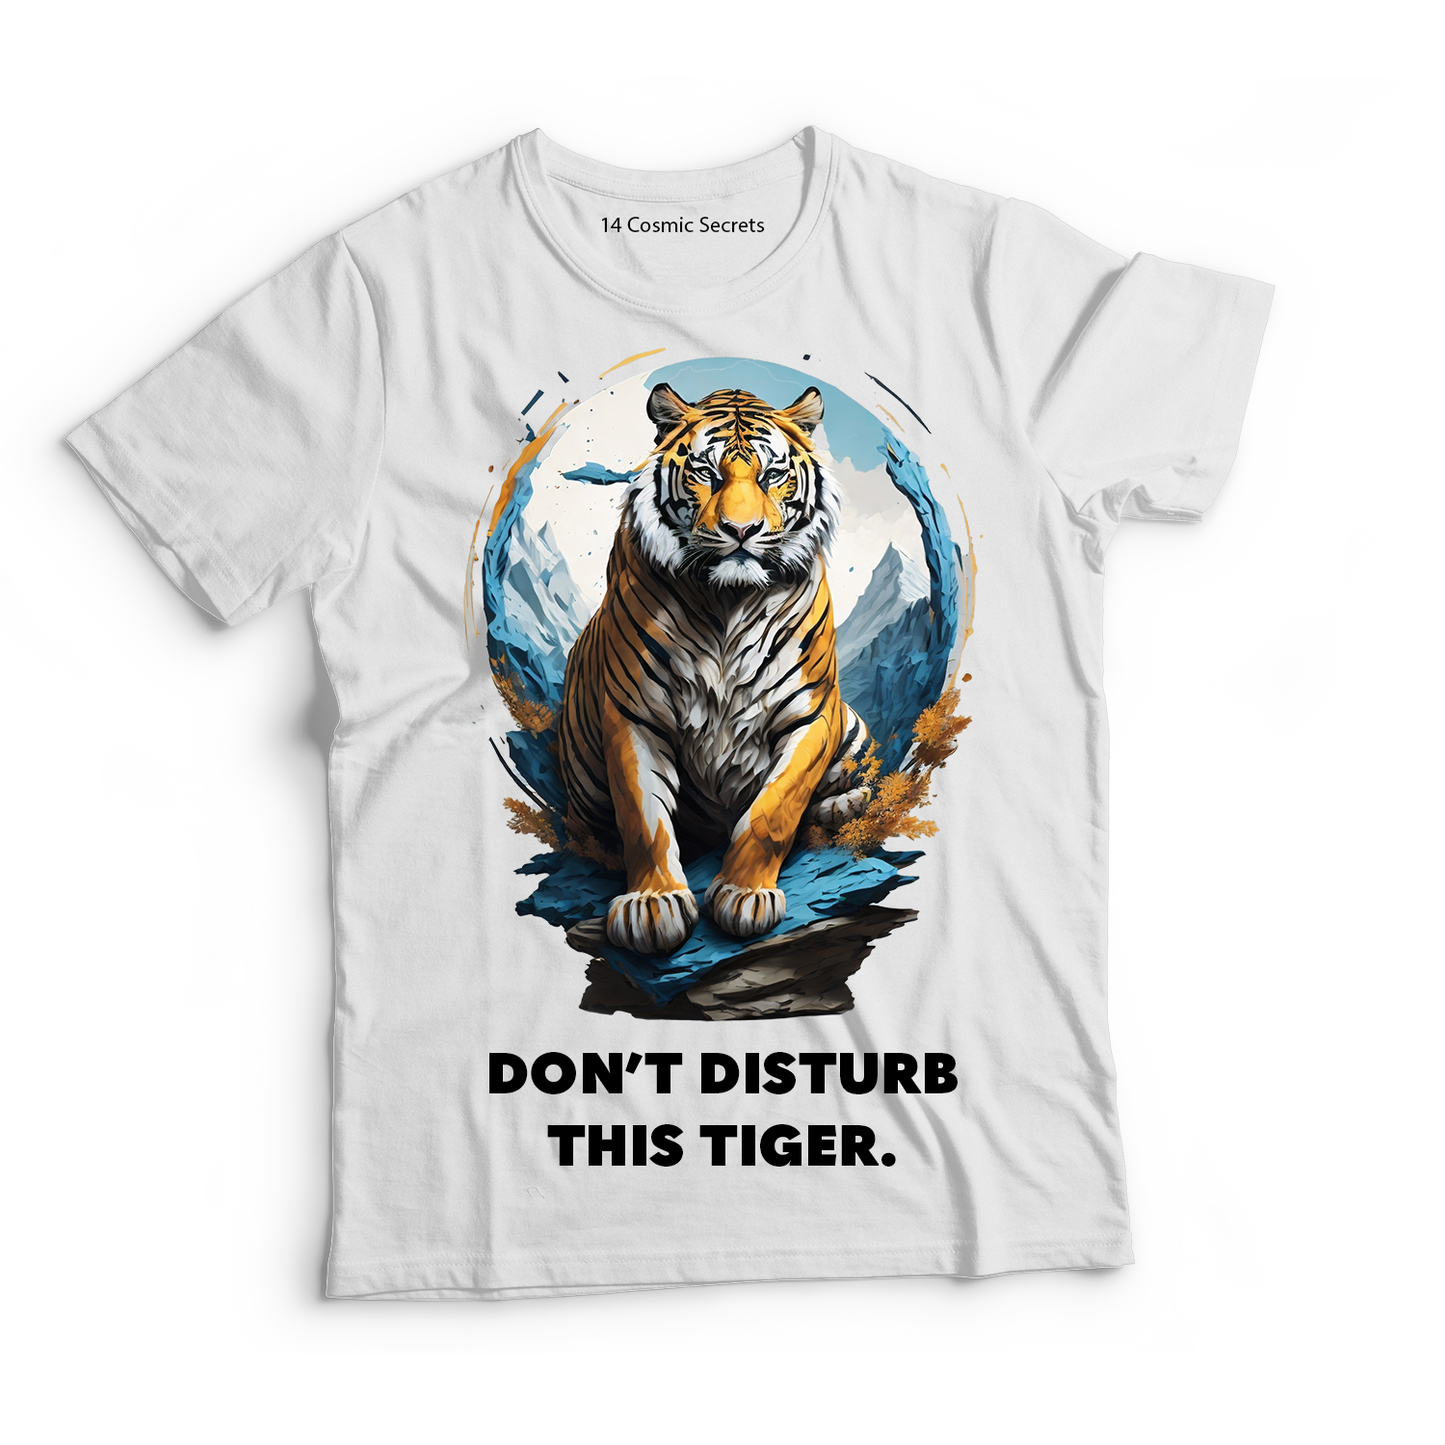 Don’t Disturb this Tiger Graphic Printed T-Shirt  Cotton T-Shirt Magnificence of India T-Shirt 🐯🐯🐯🐯🐯